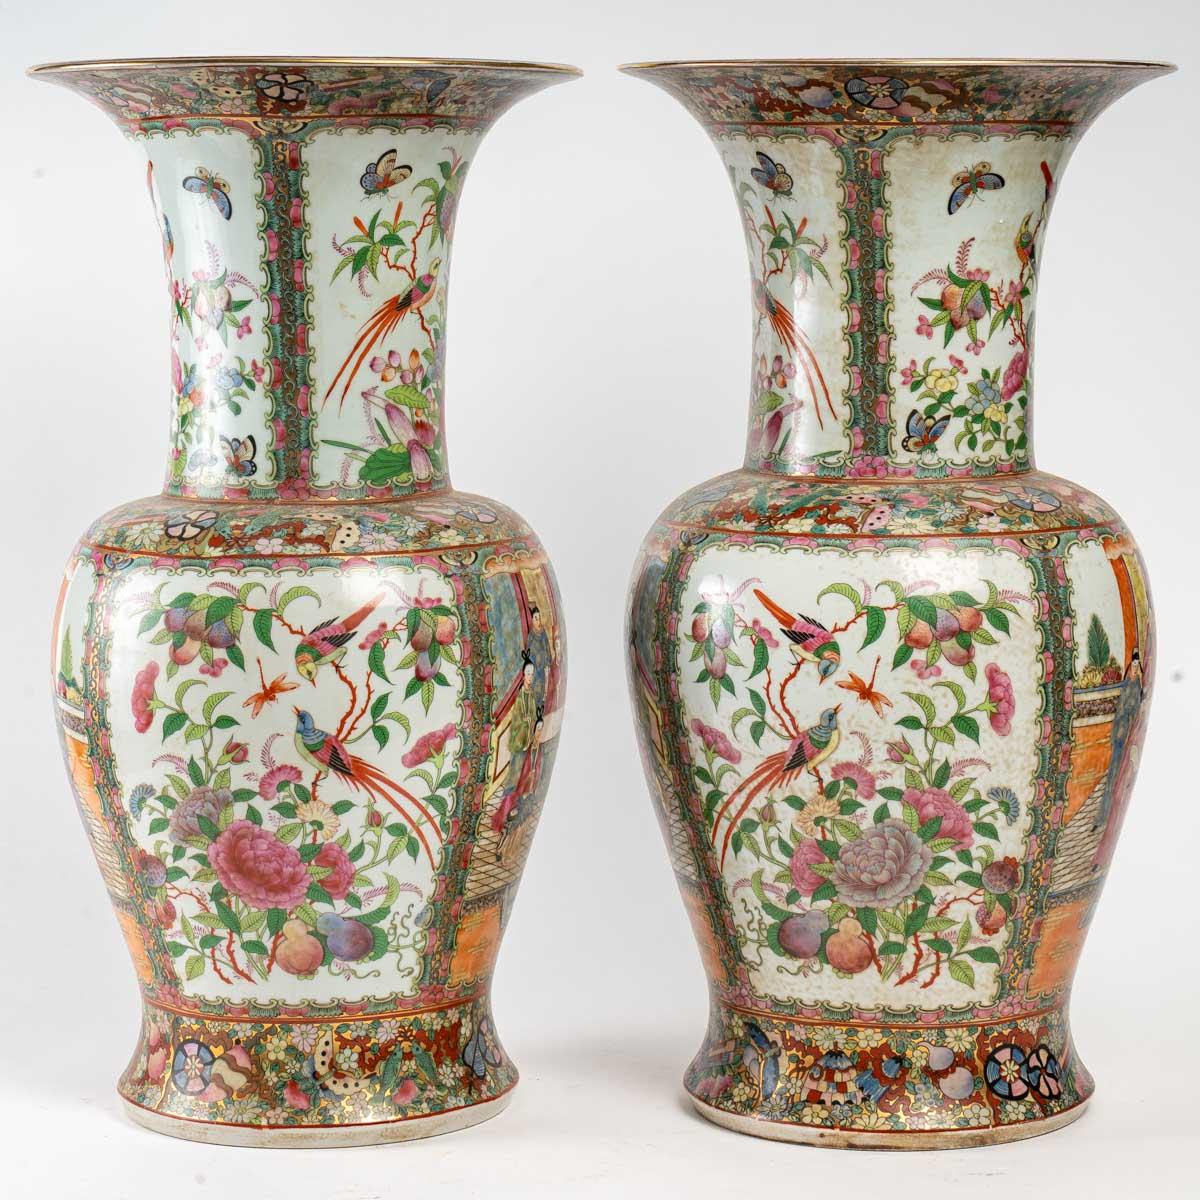 Important Pair of Canton Vases, China 1